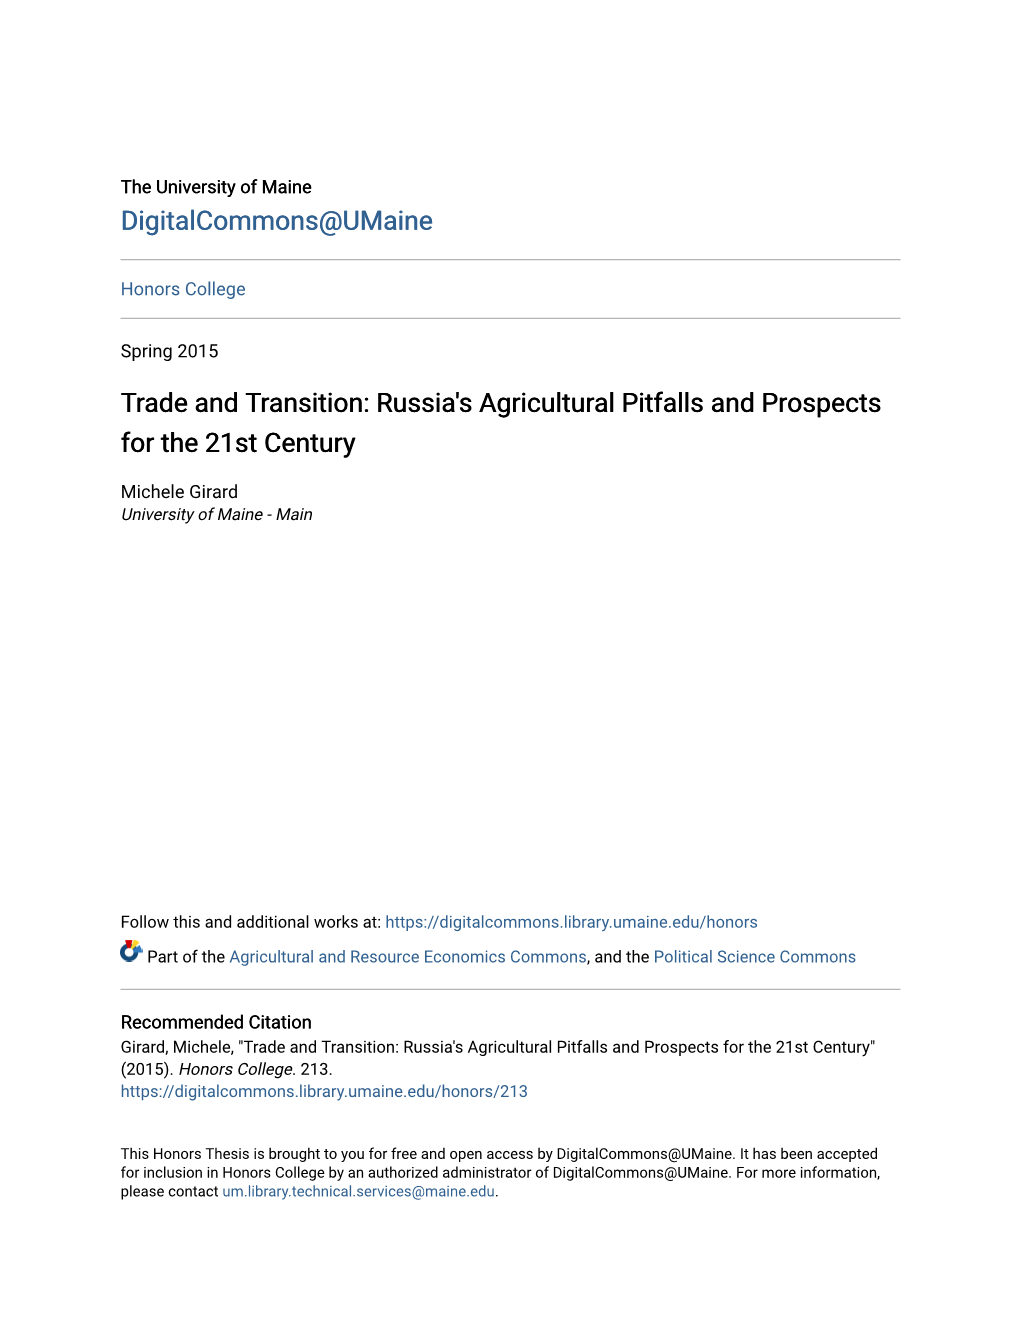 Trade and Transition: Russia's Agricultural Pitfalls and Prospects for the 21St Century